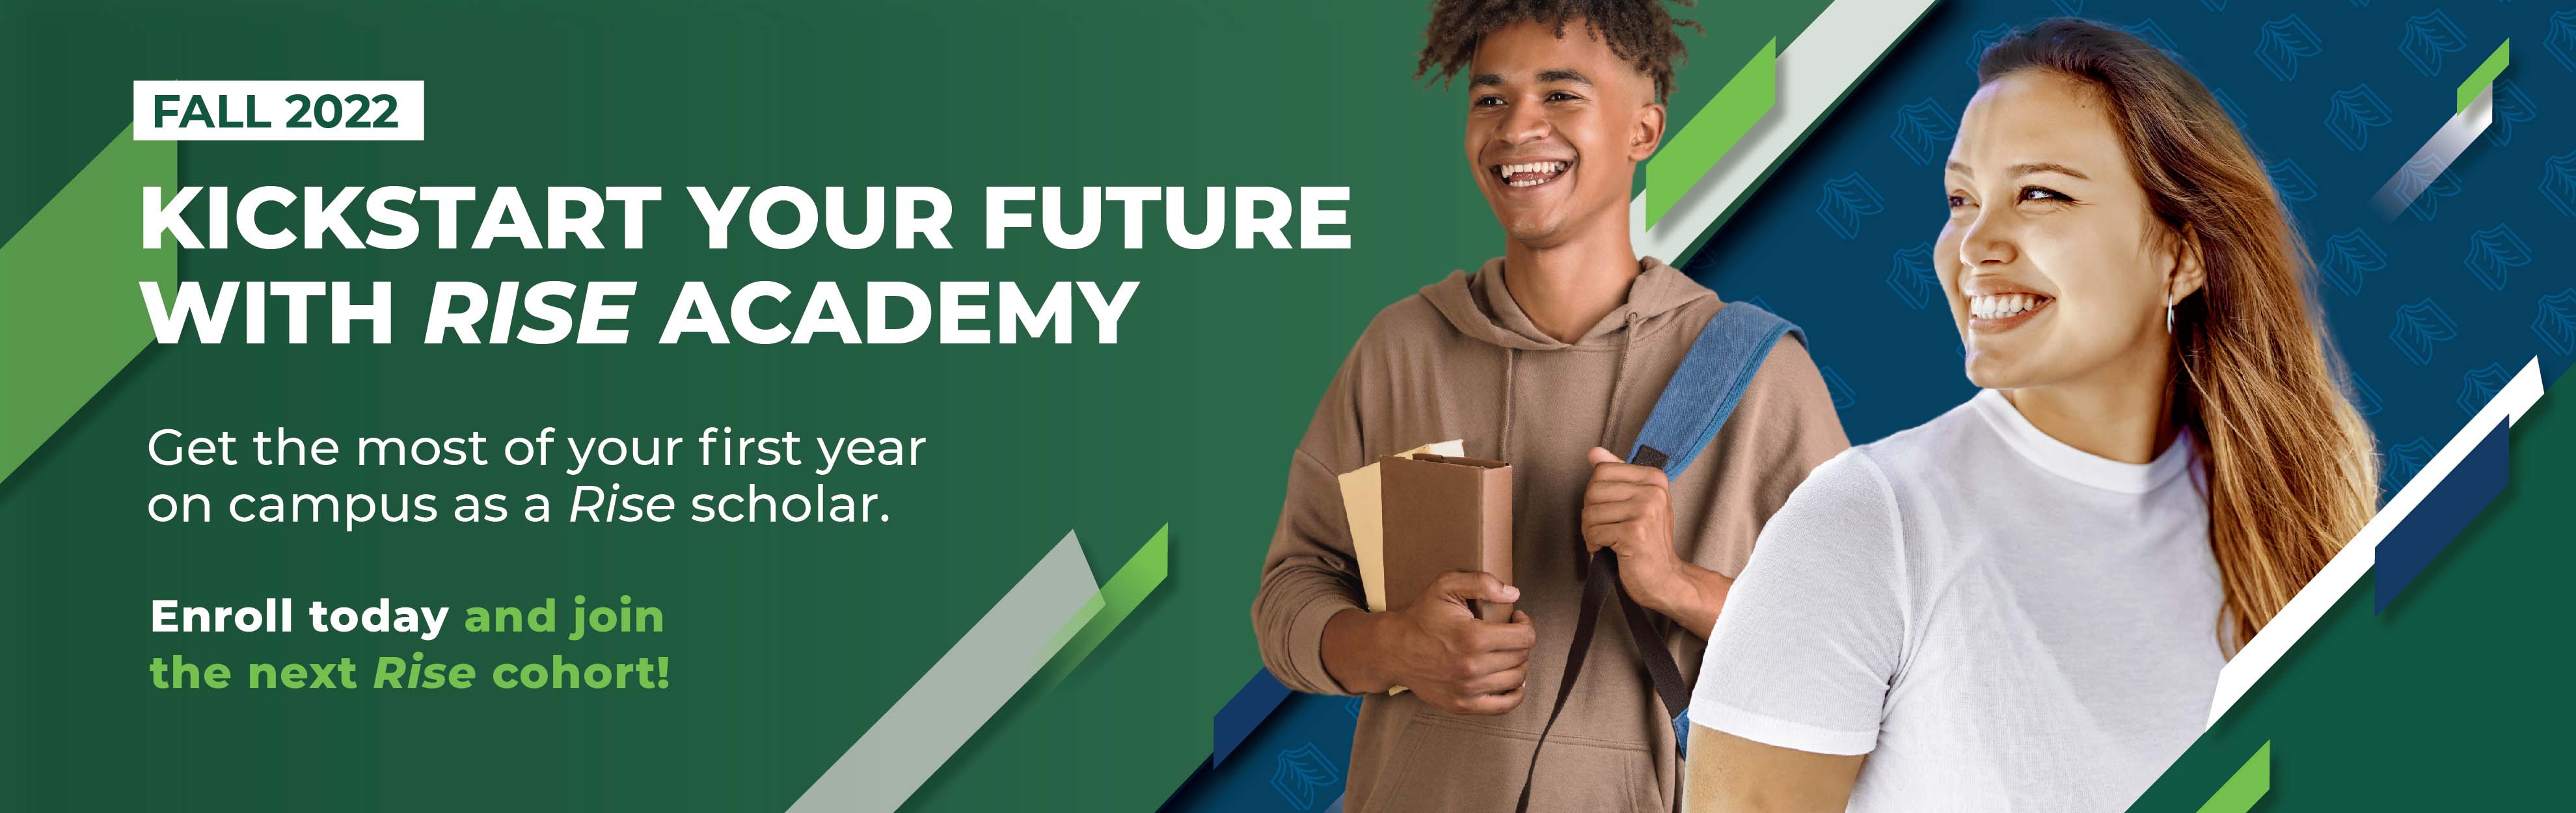 Kickstart Your Future with Rise Academy